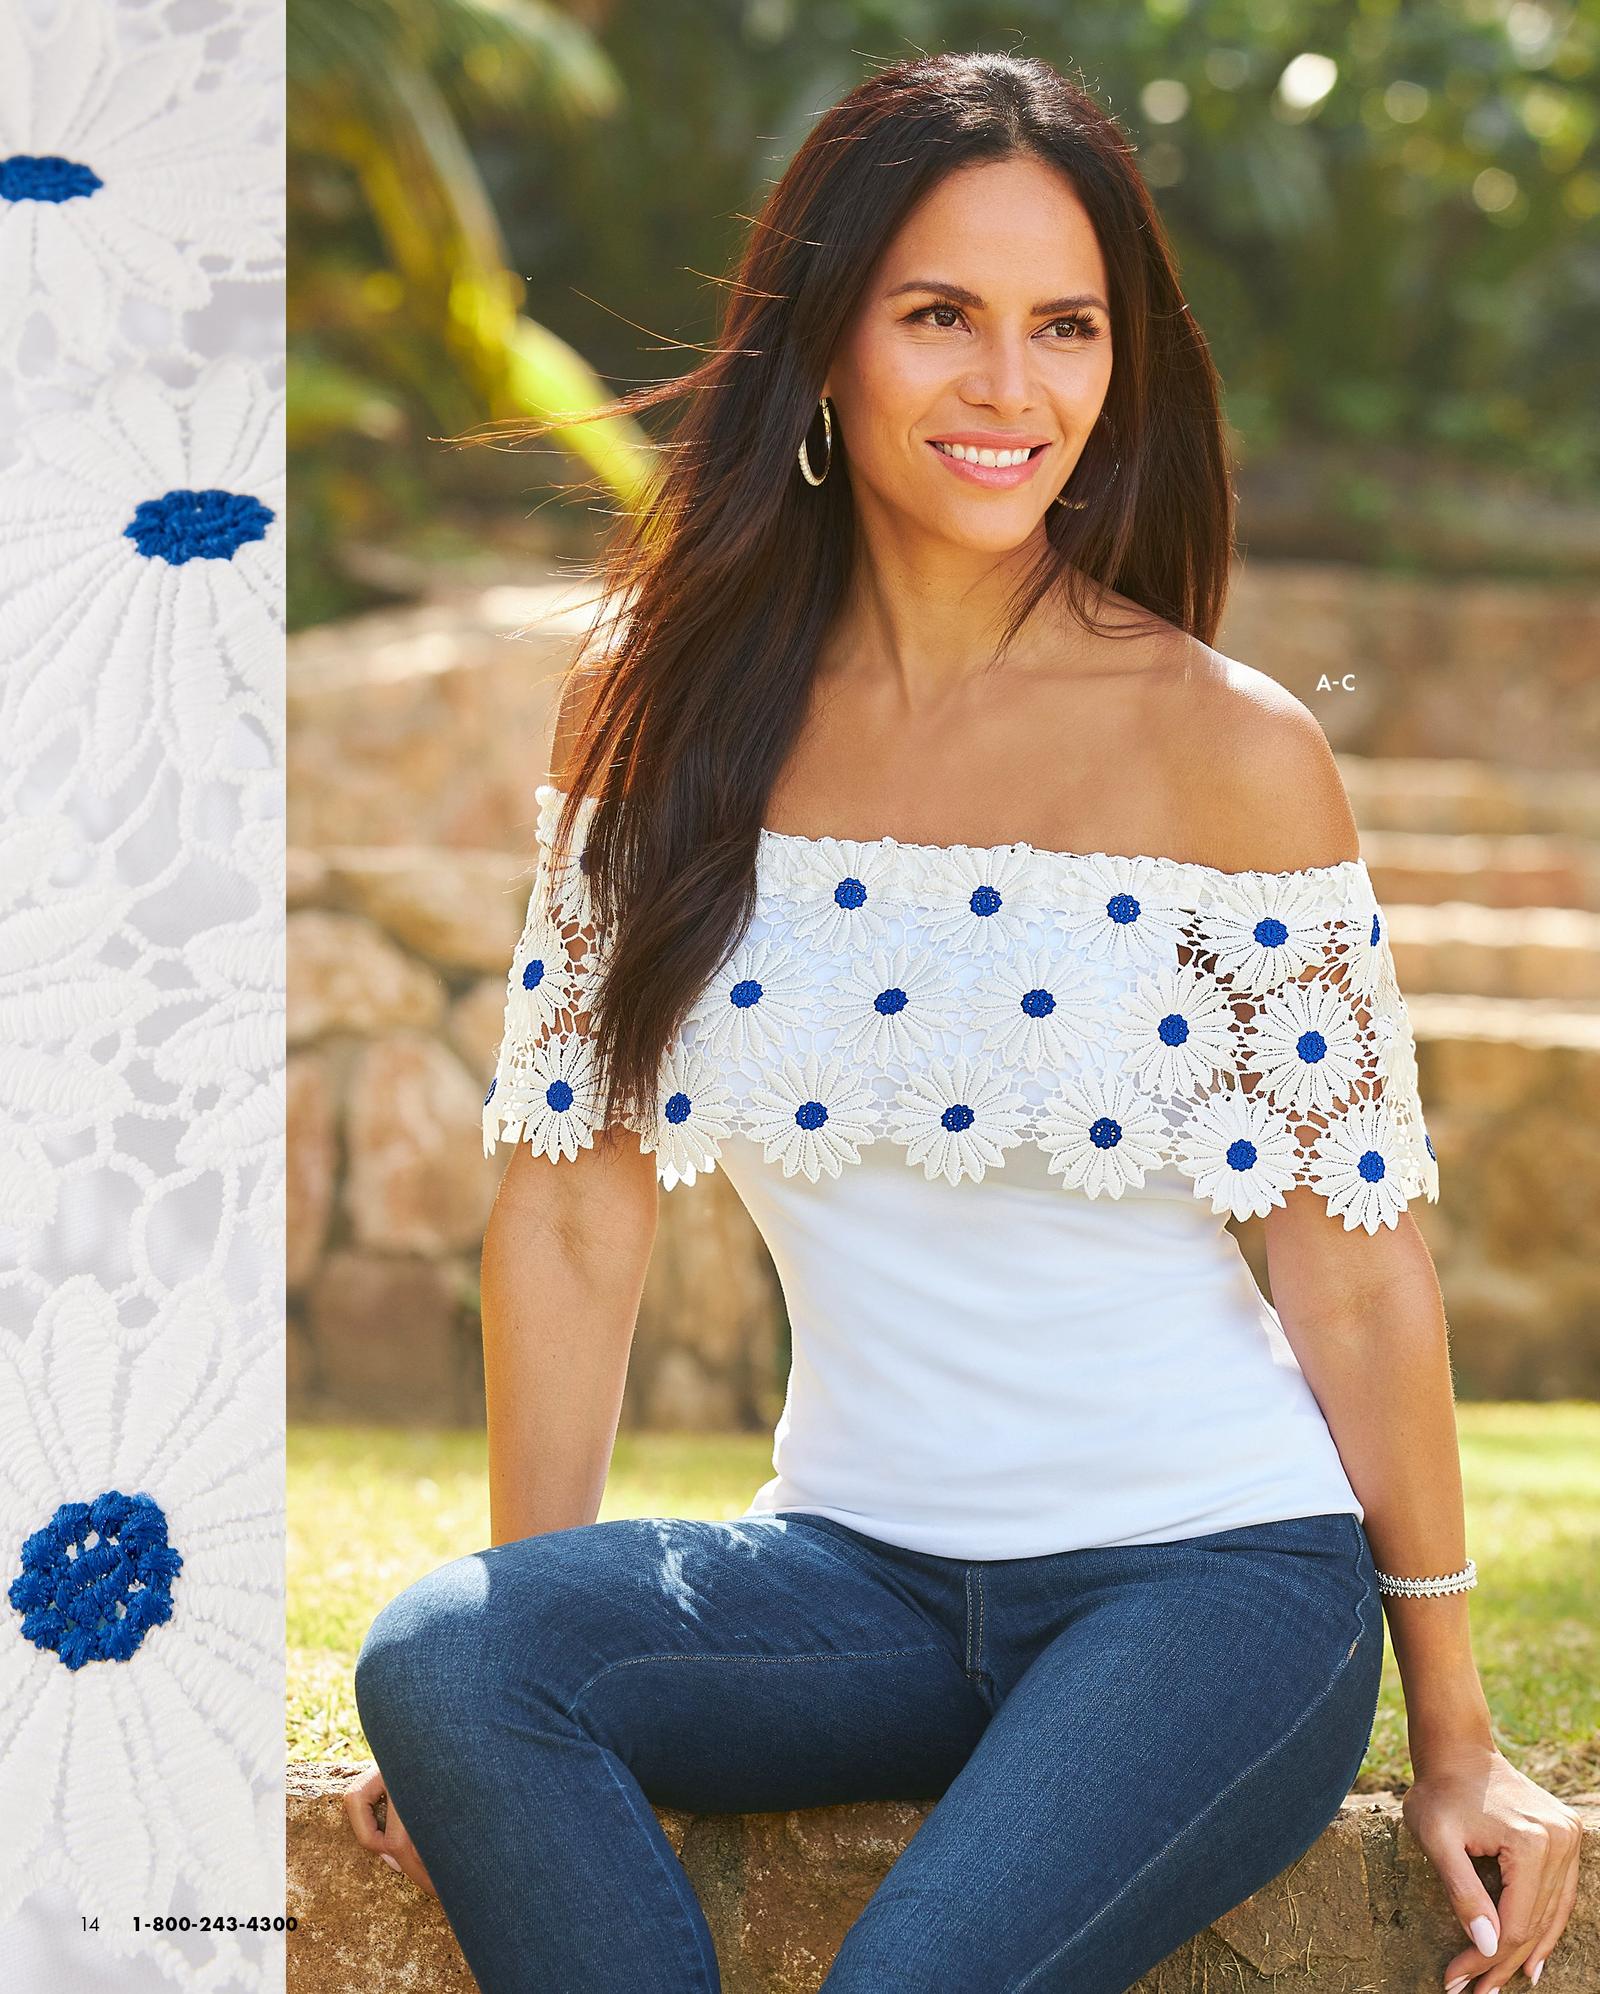 model wearing a white daisy lace embellished off-the-shoulder top, dark wash jeans, and silver hoop earrings.